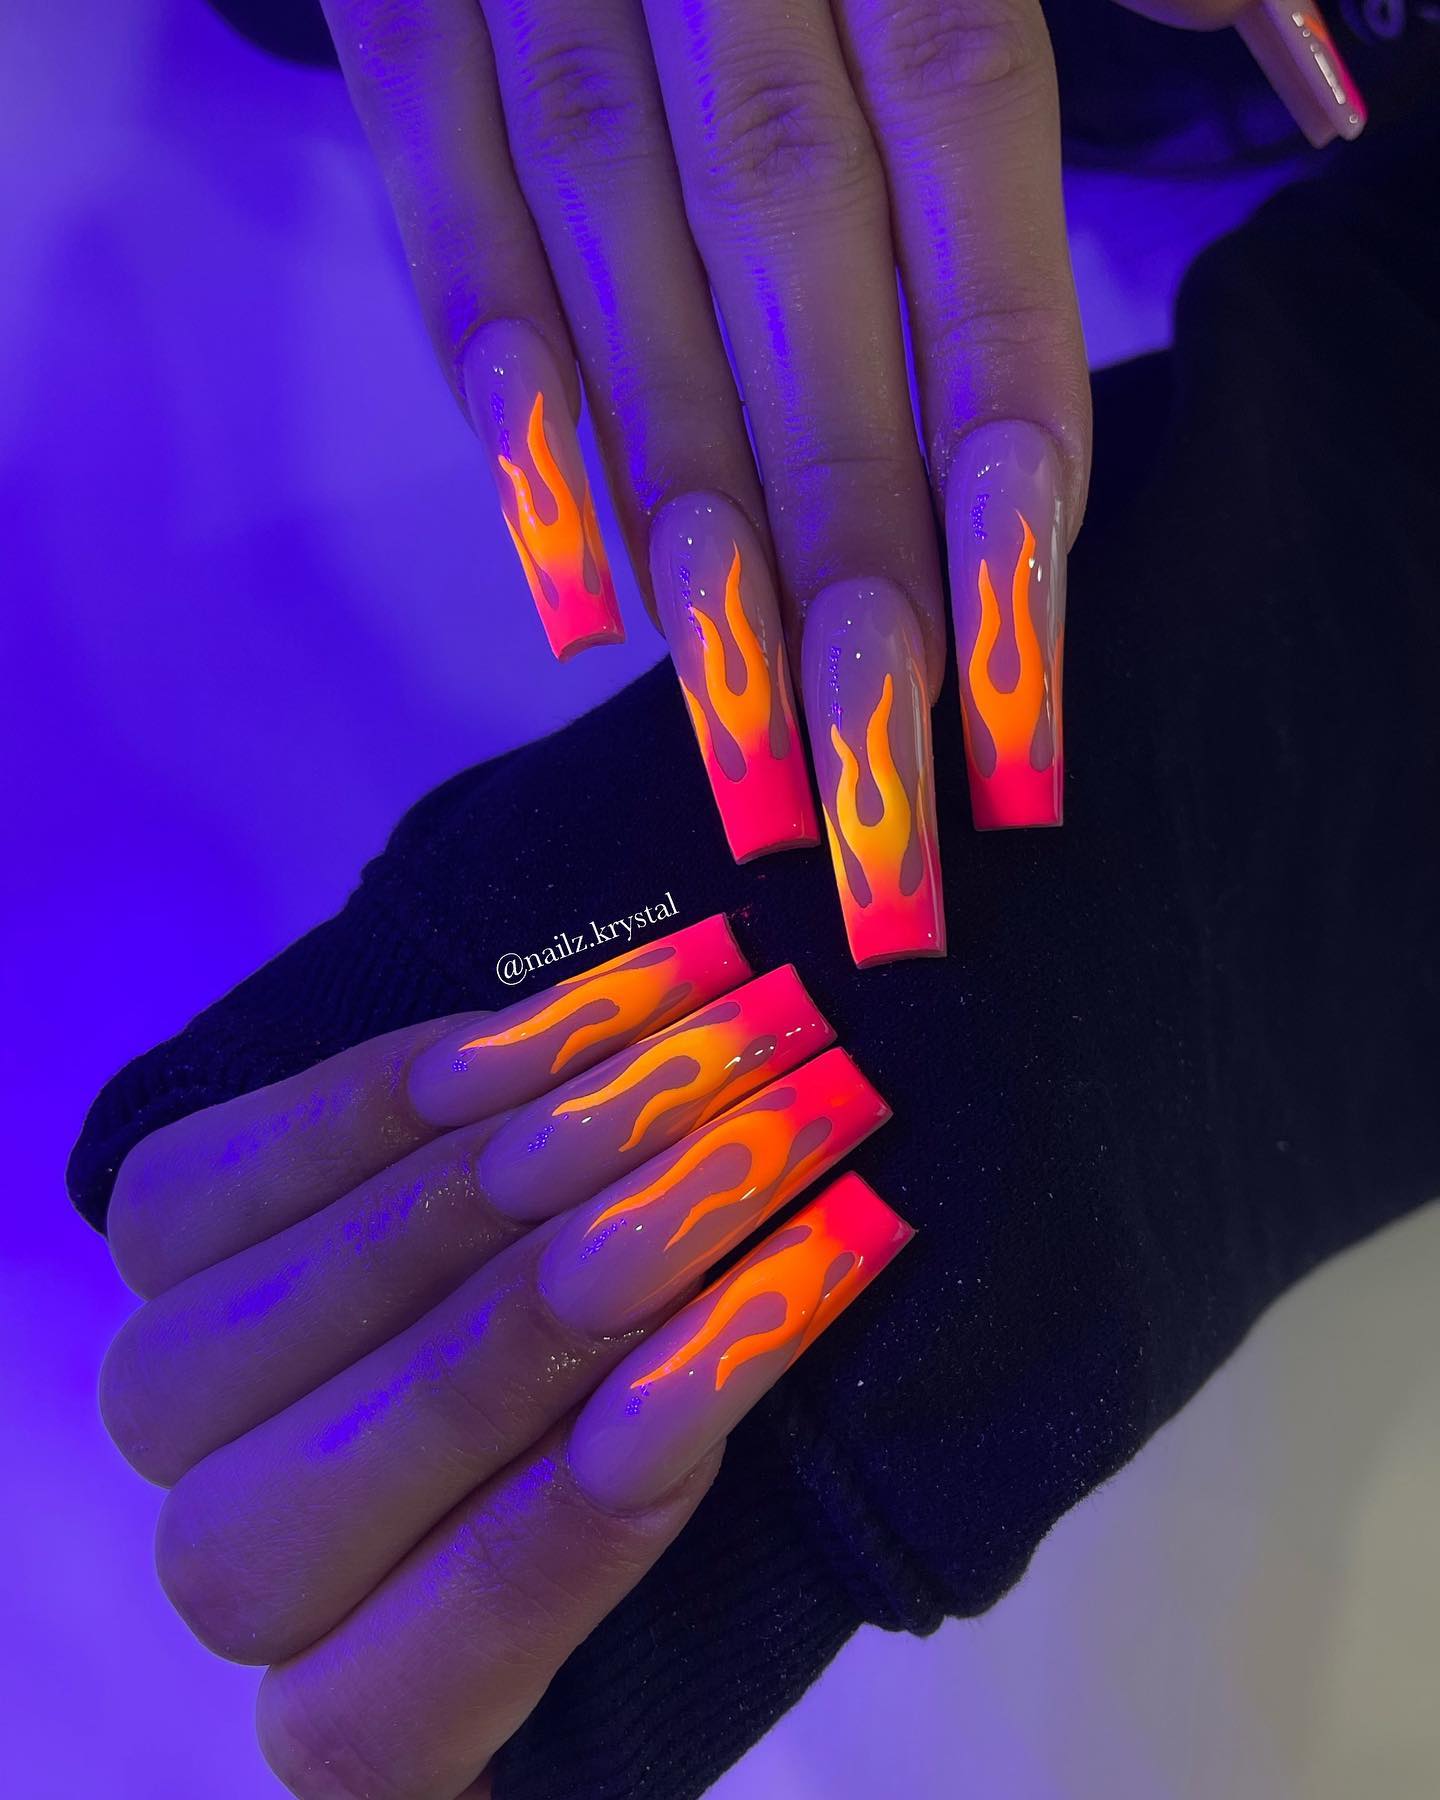 Wanna have nails that are brighter than the actual Sun? Then, this flame nail design is for you. Having neon orange flames with a pink French tips is a great way to stand out with your nails.